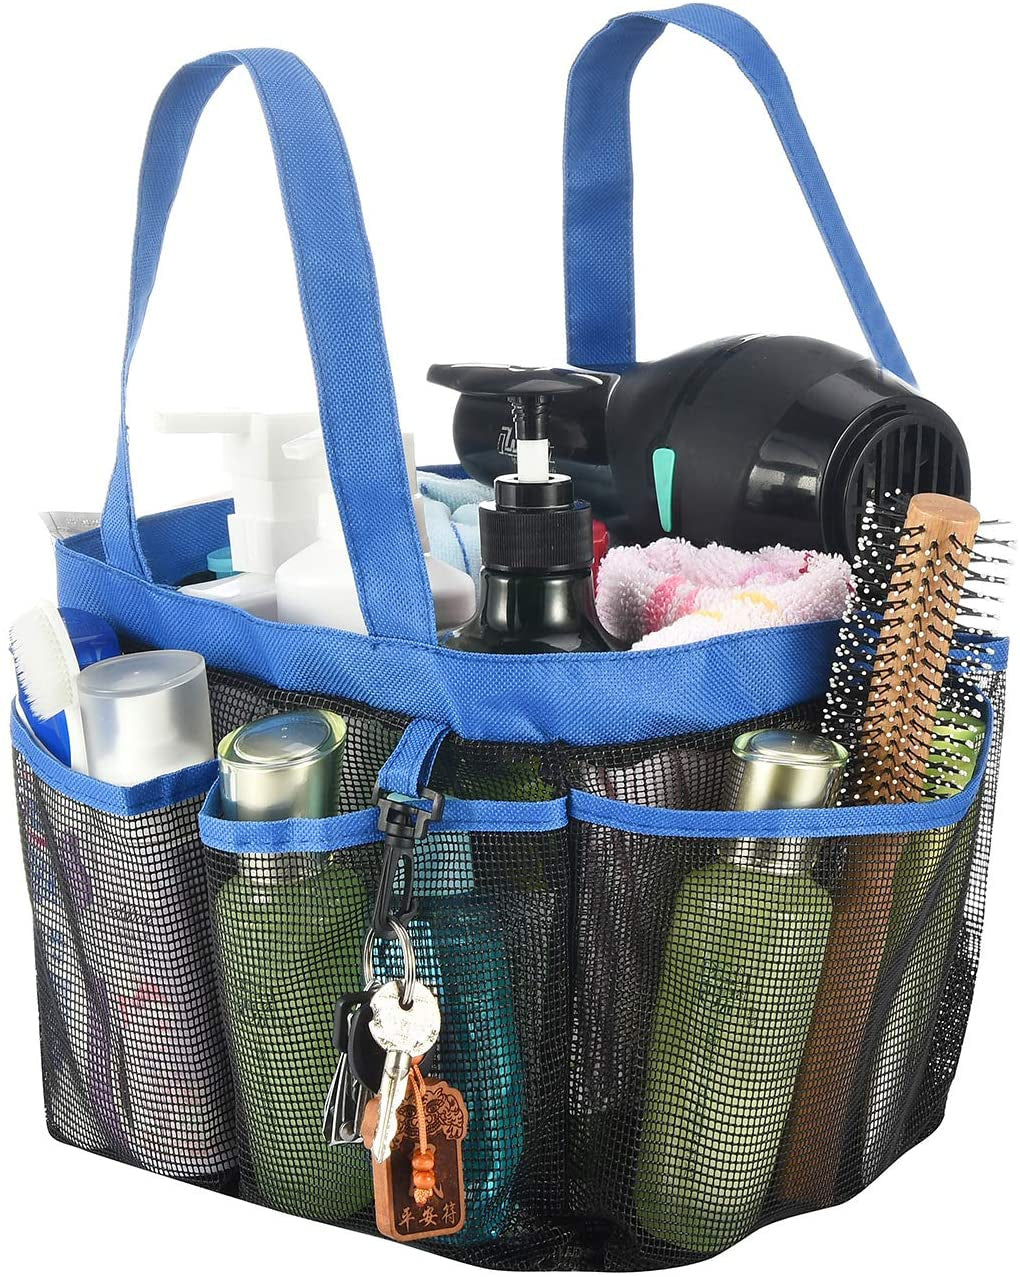 Haundry Portable Mesh Shower Caddy, 8 Basket Tote for Bathroom College Dorm, Large Shower Caddy Bag for Camping Gym